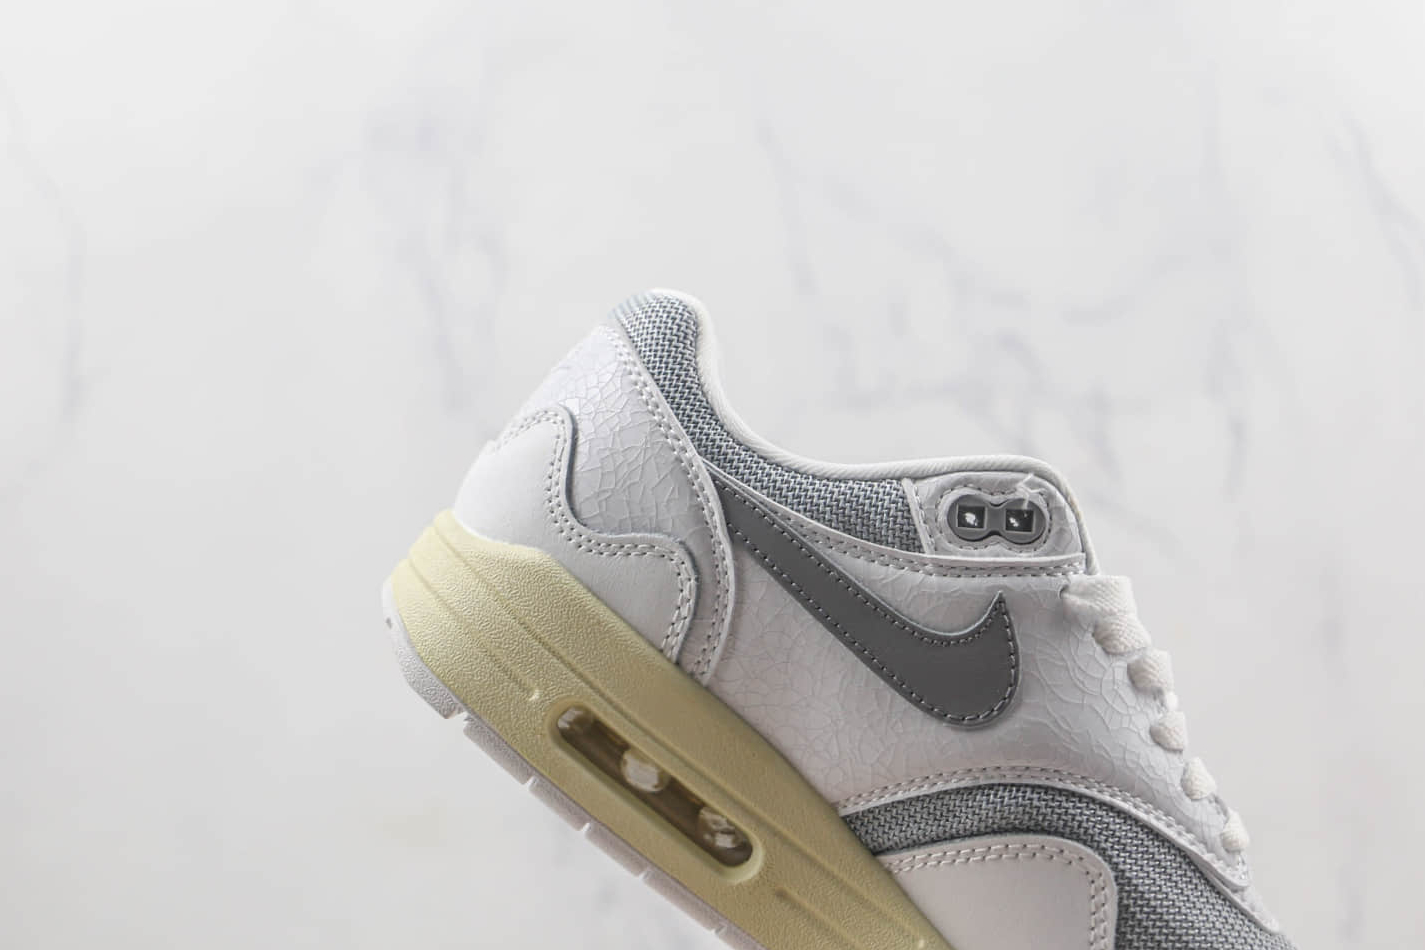 Nike Patta x Air Max 1 'White' DQ0299-100 - Limited Edition Sneakers